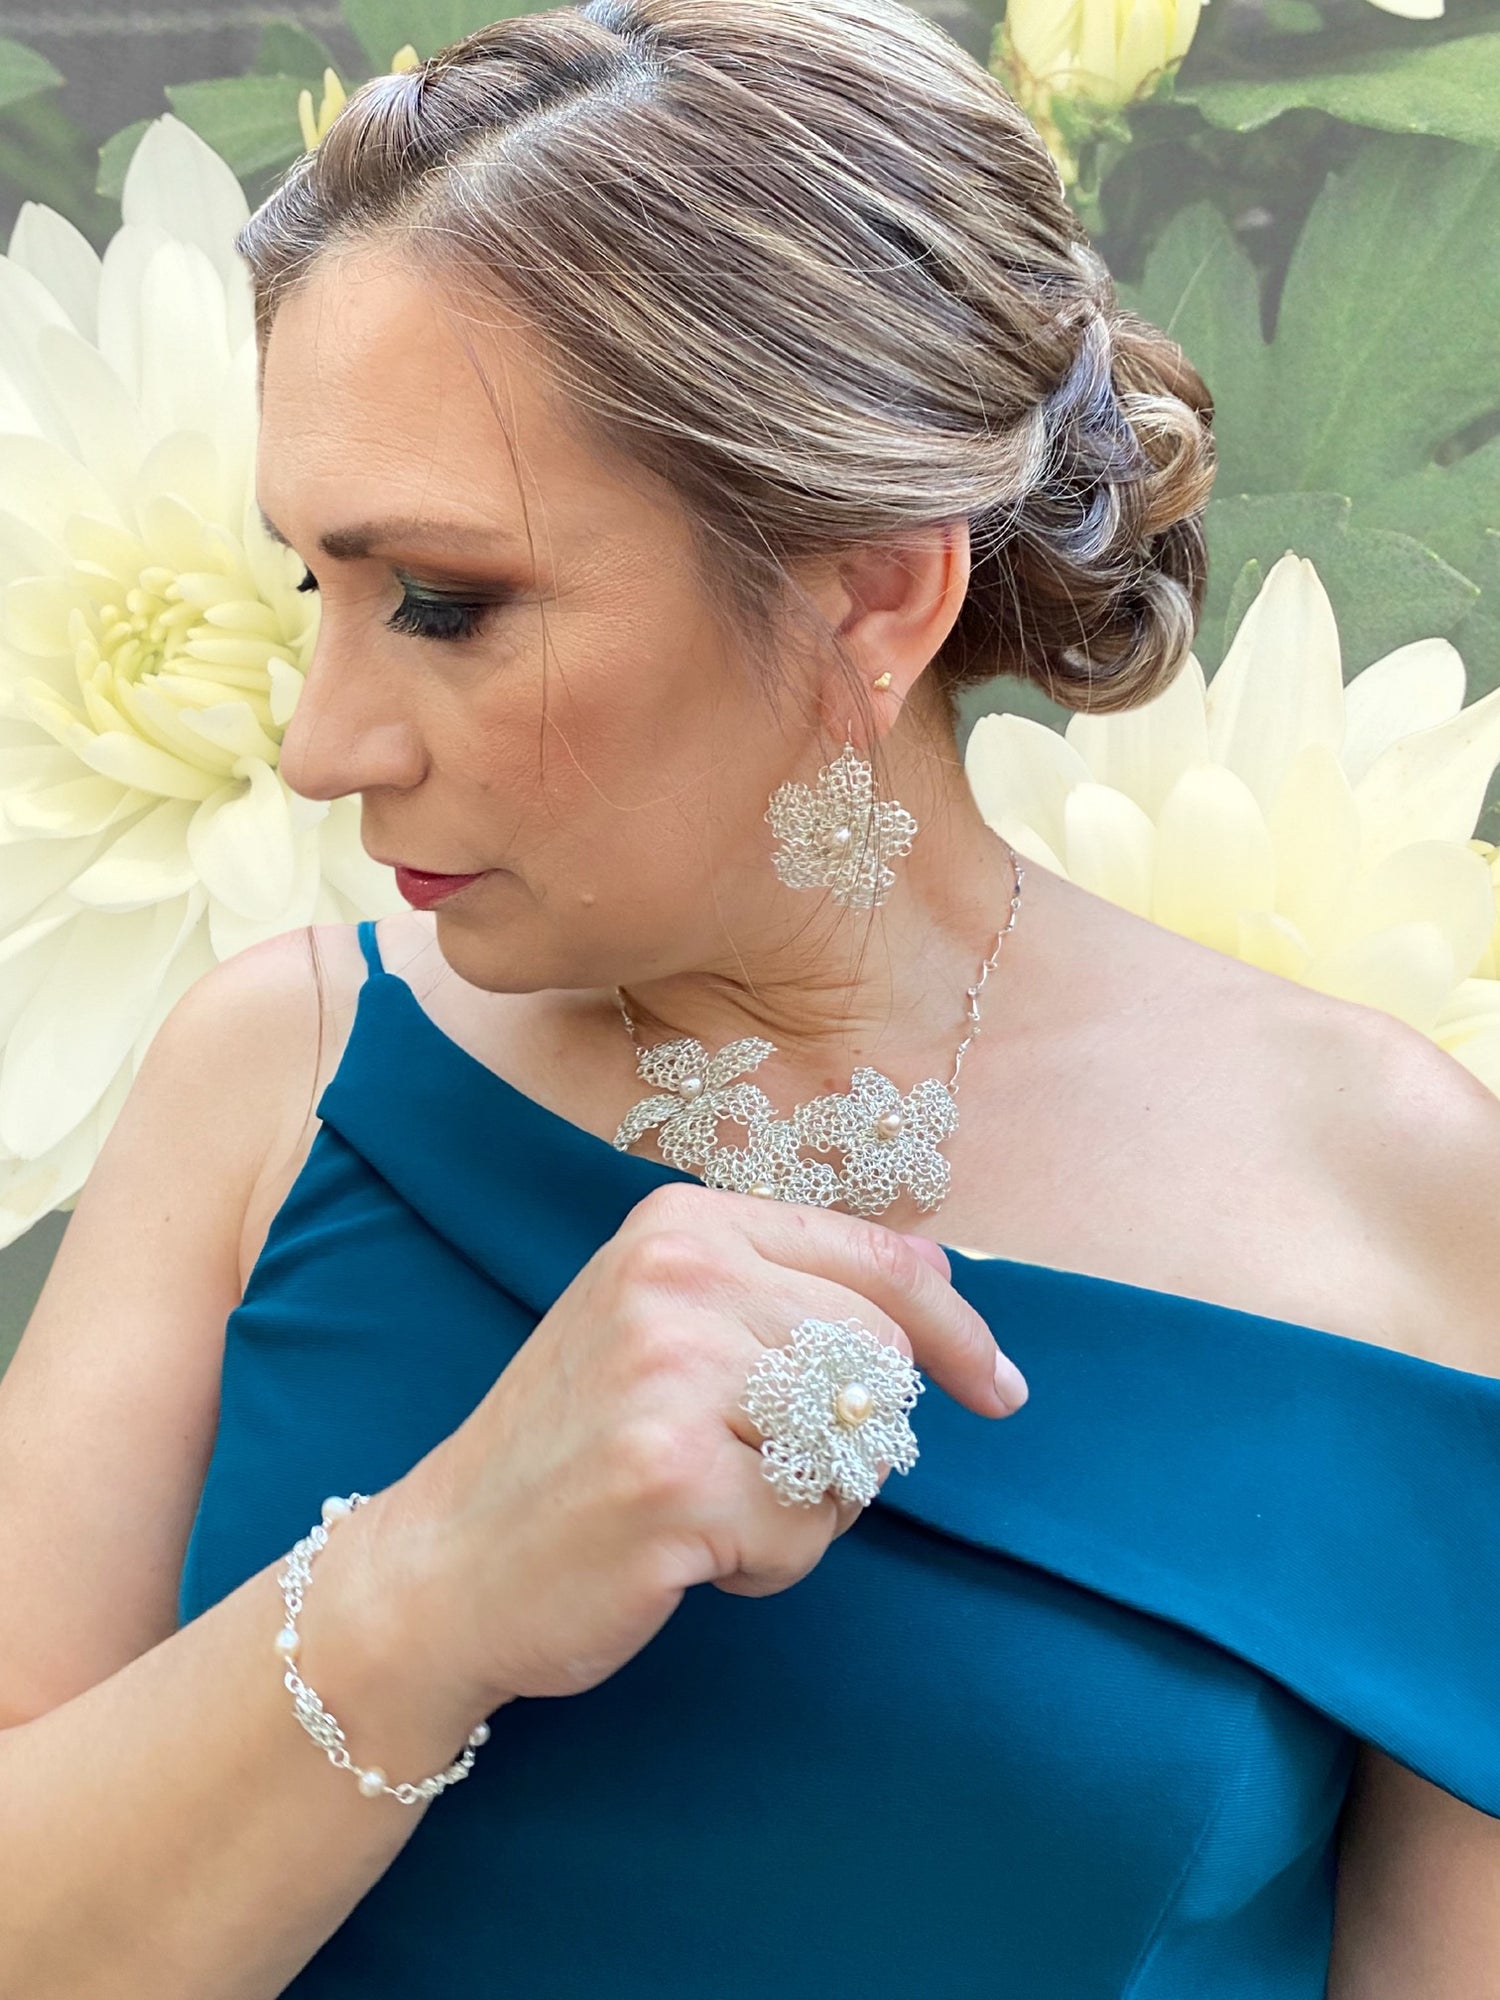 side profile of Any with her hair up while she wears a blue green dress and a silver flower shaped crochet jewelry collection